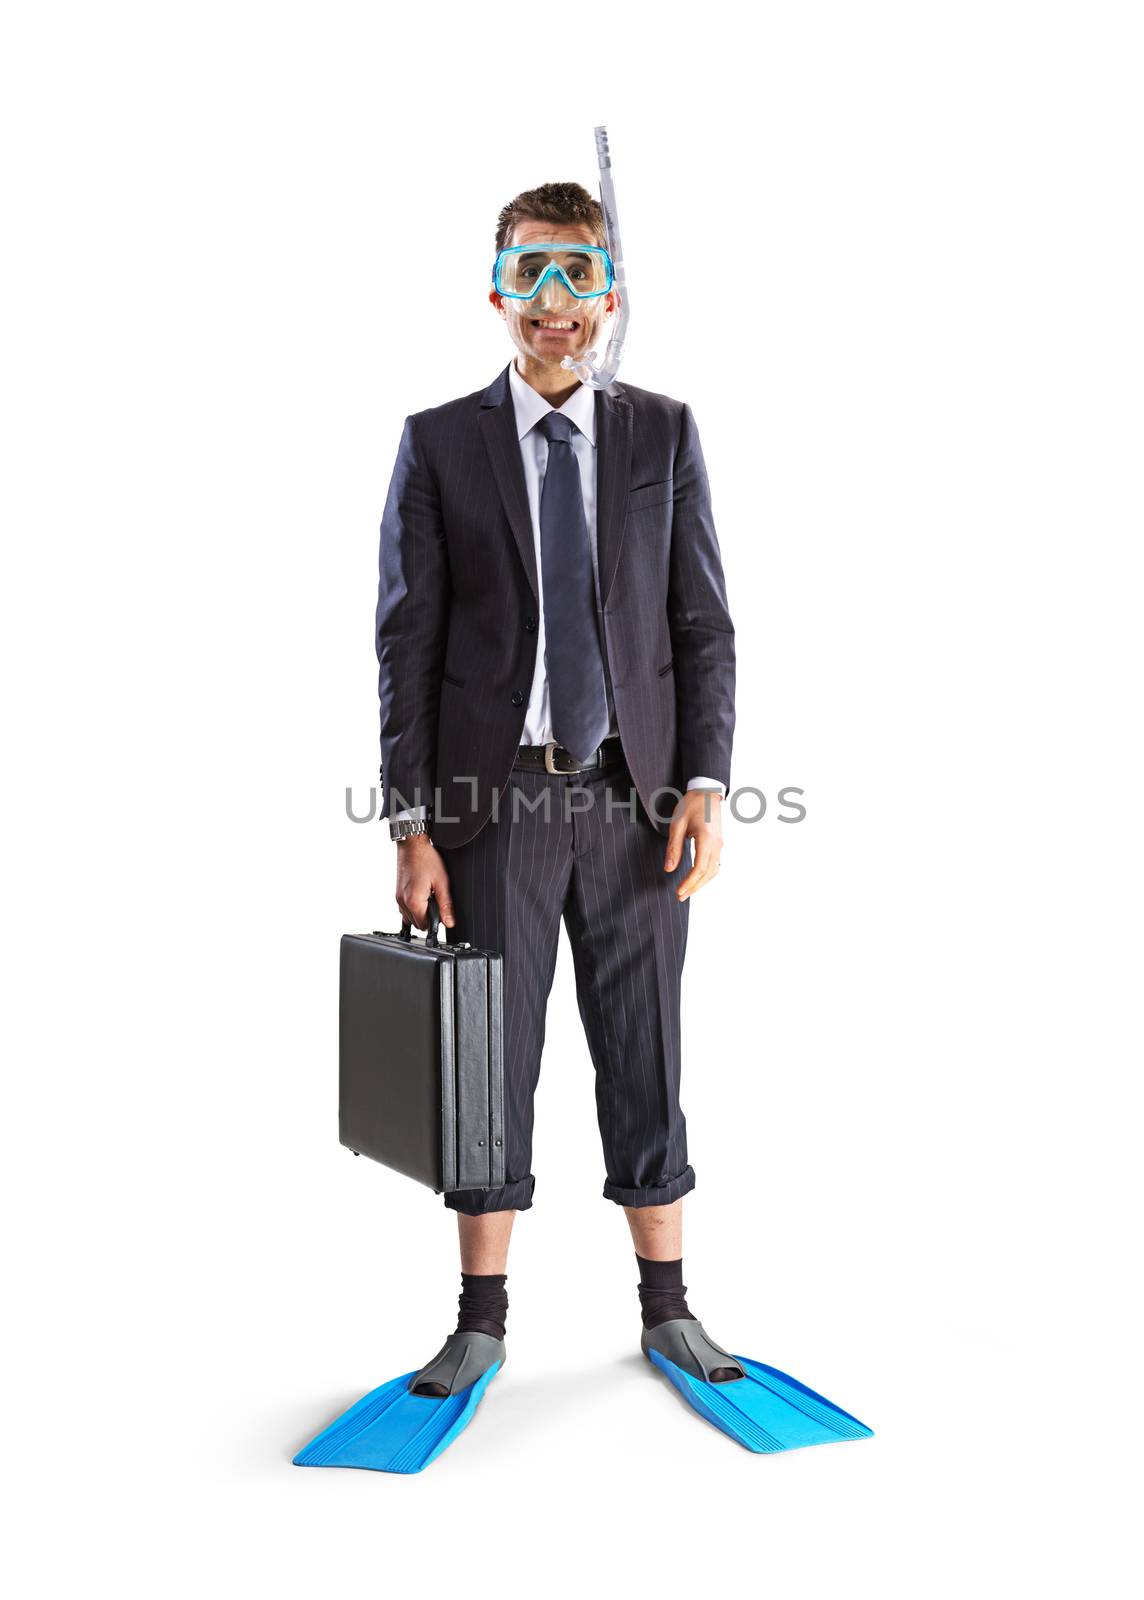 Smiling businessman with scuba mask and diving flippers holding a briefcase on white background.